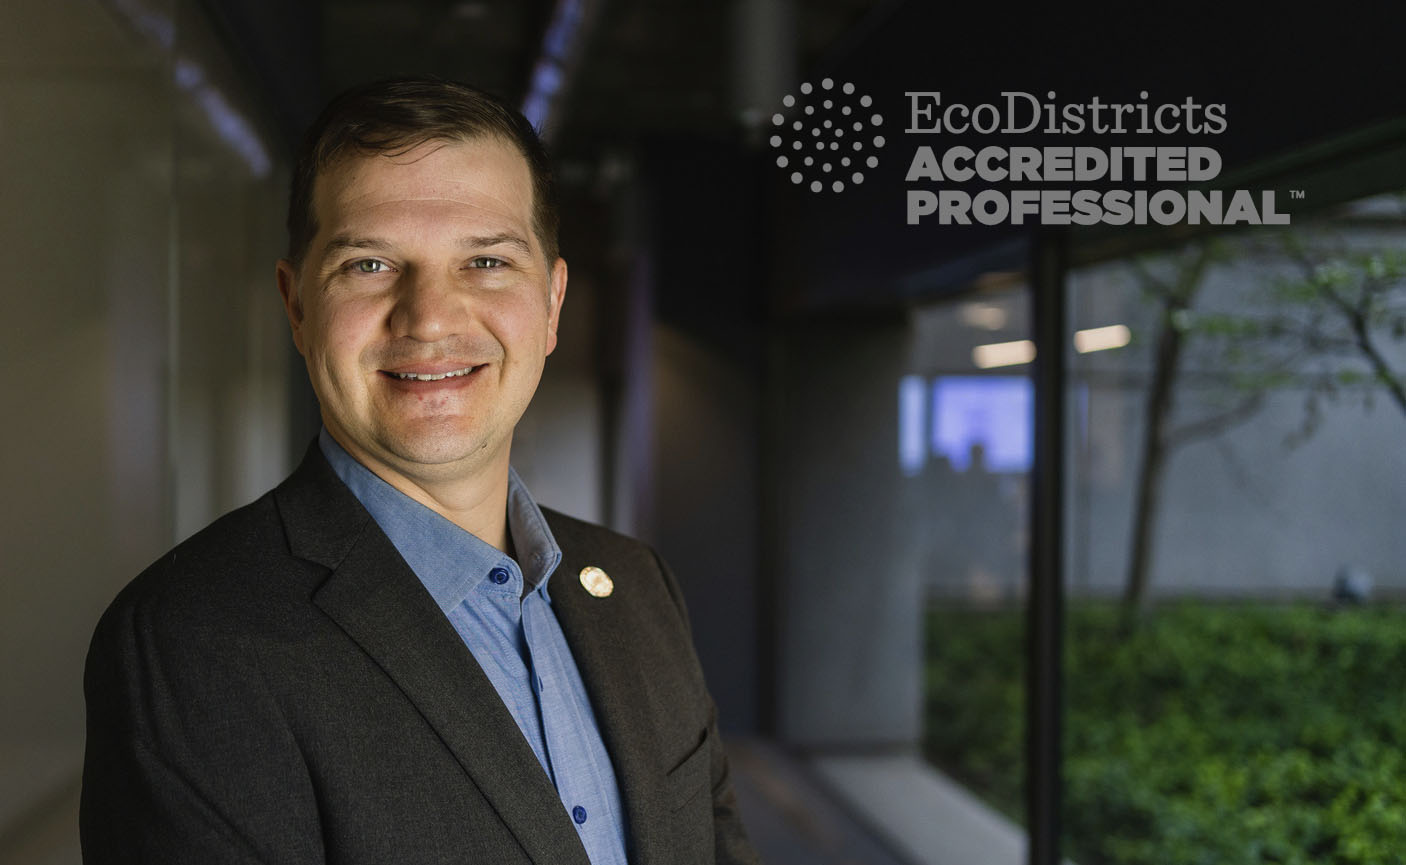 Jeremy Knoll is BNIM's latest EcoDistricts Accredited Professional